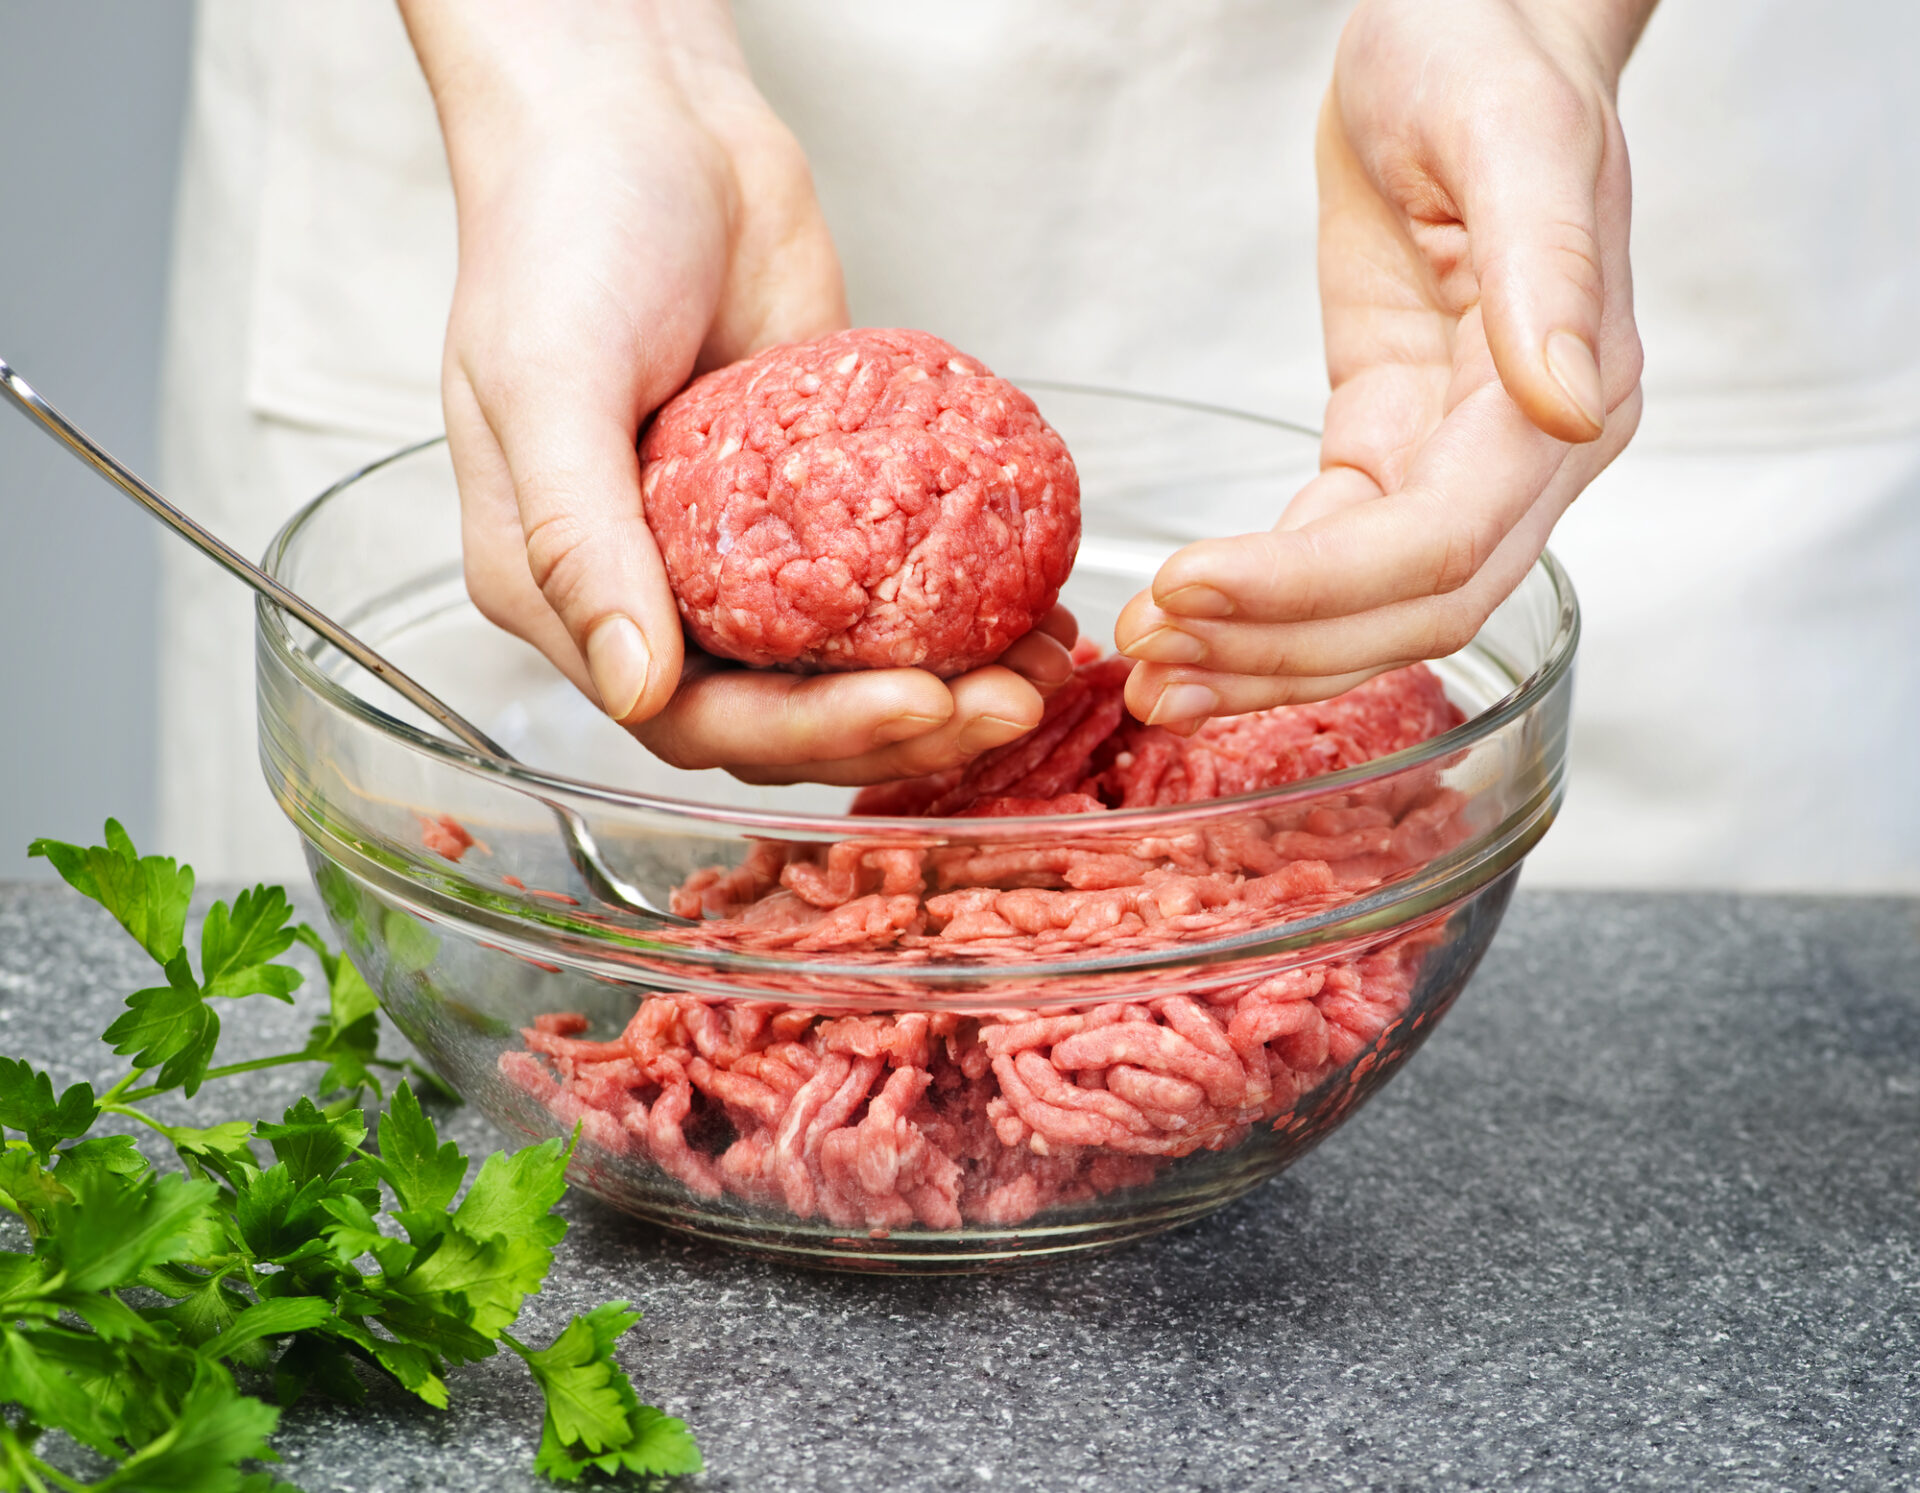 Using hands to form a patty from ground beef in a glass bowl.